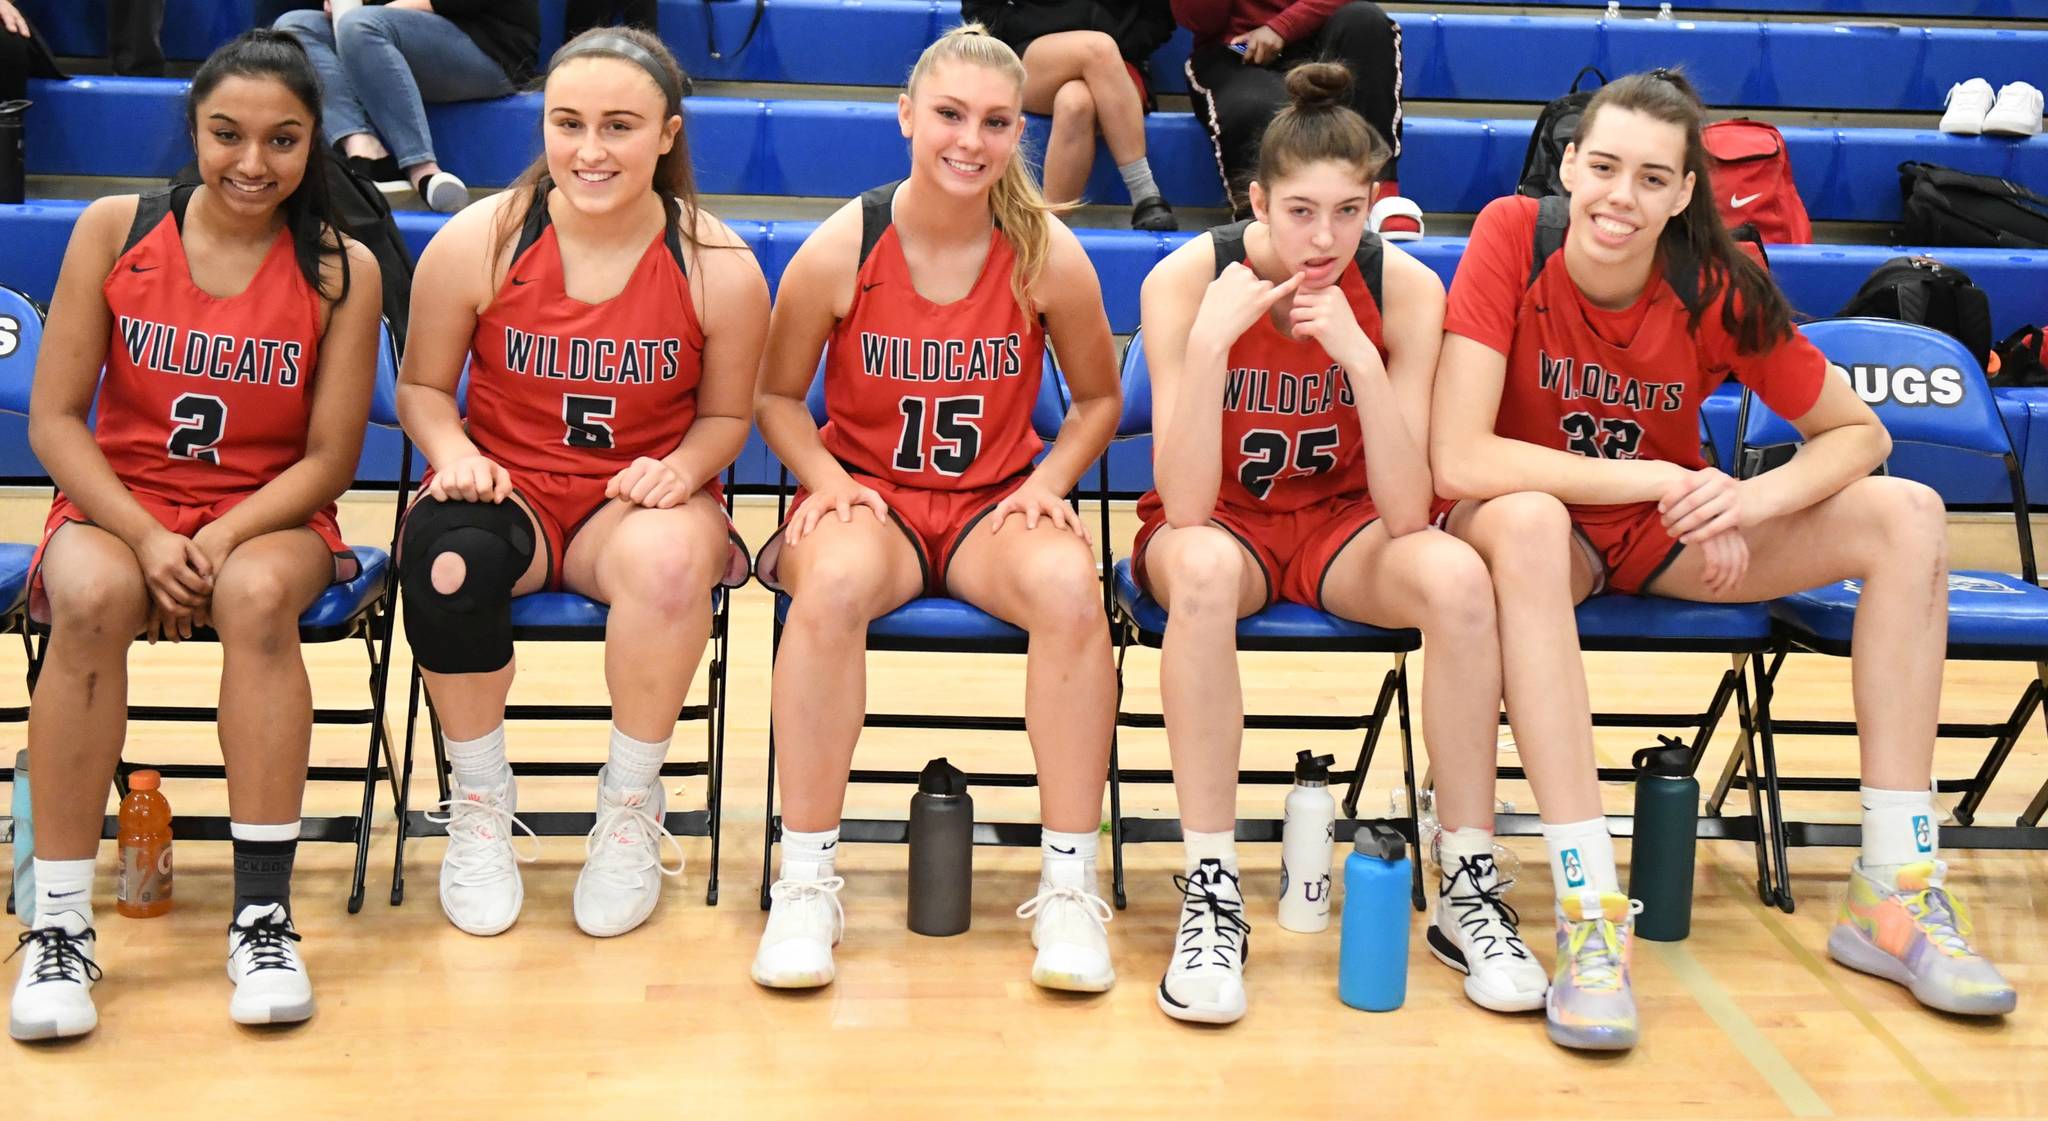 Mount Si’s starters against Woodinville, from left Nitika Kumar, Izzy Smith, Joelle Buck, Lauren Glazier and Sela Heide. Photo courtesy of Calder Productions